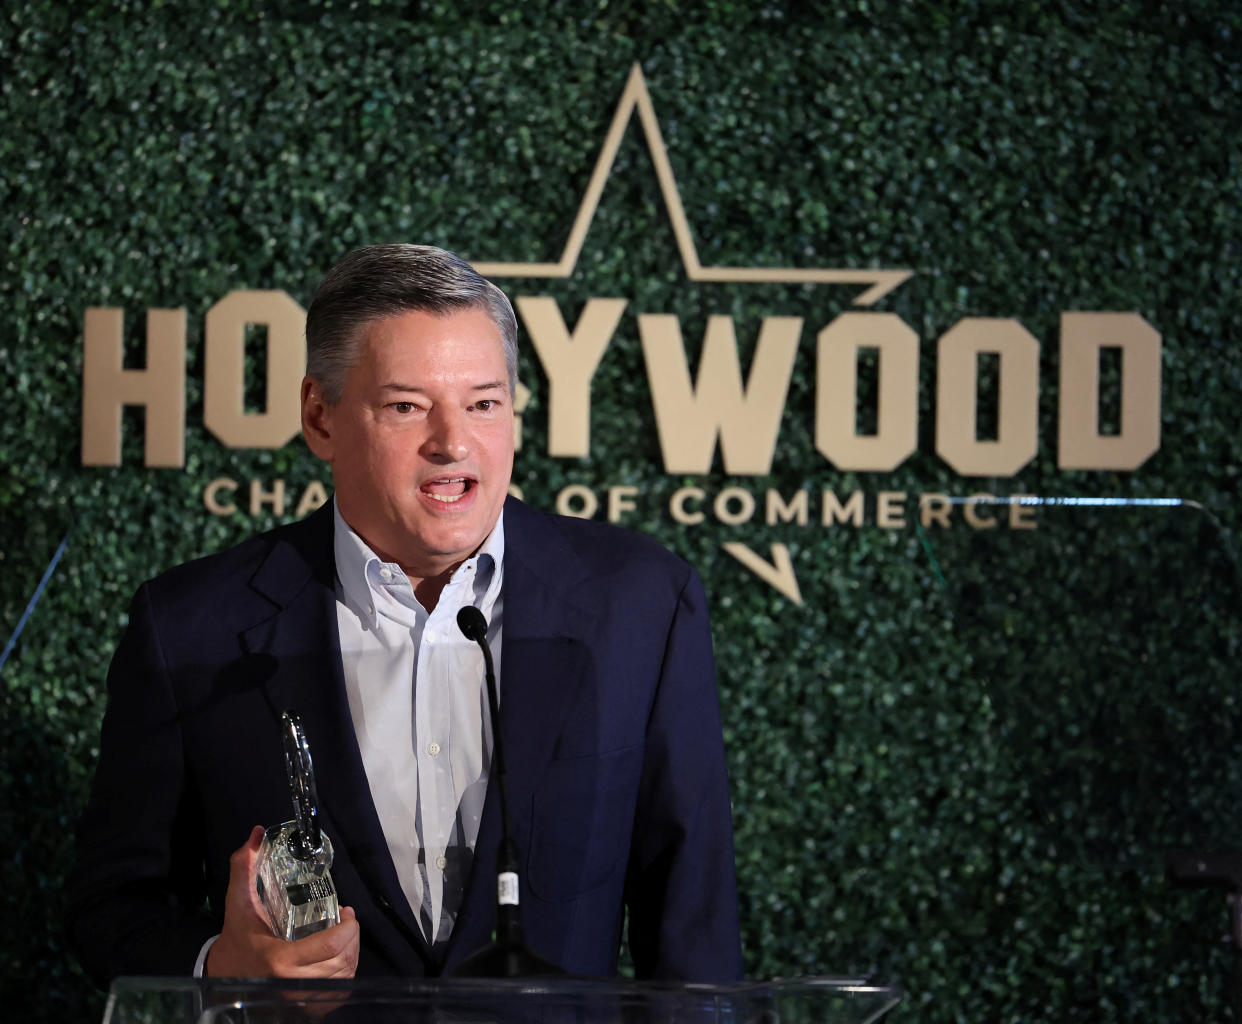 Netflix Co-CEO Ted Sarandos accepts the 2022 Economic Development Visionary Award during the Hollywood Chamber of Commerce 2022 Economic Development Summit in Los Angeles, California, U.S., August 25, 2022. REUTERS/Mario Anzuoni